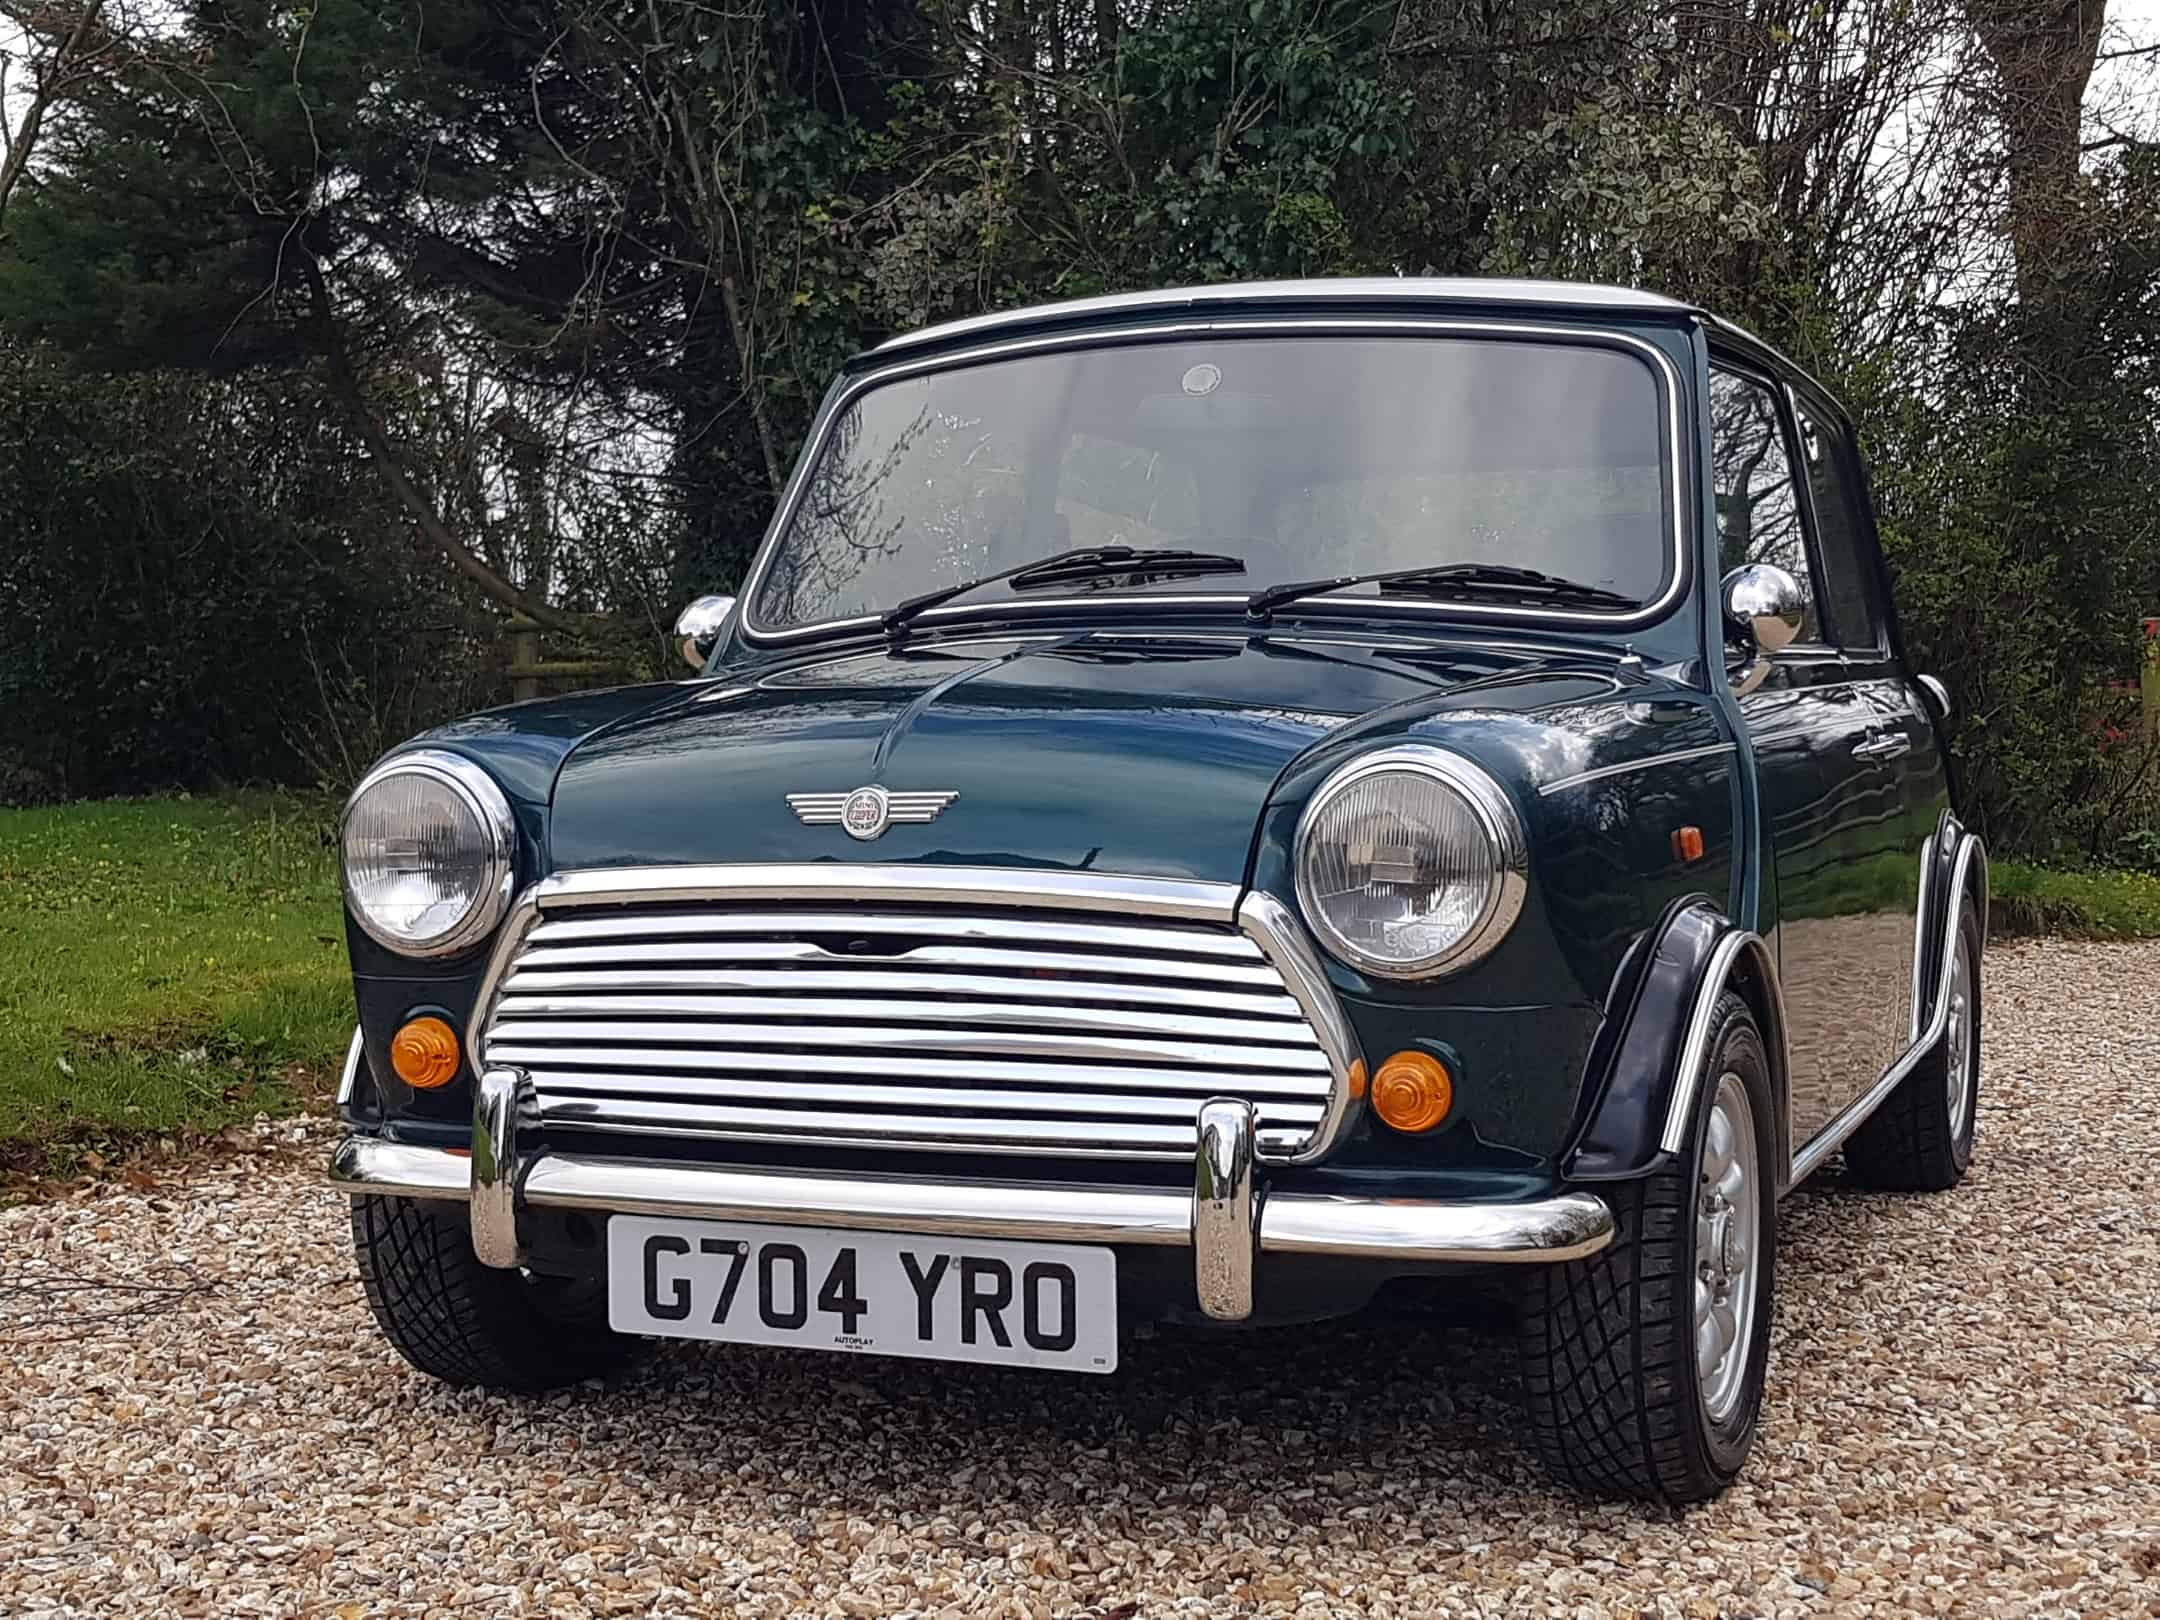 ** NOW SOLD ** 1990 Mini Racing Green LTD Edition With ‘John Cooper Garage Conversion”.